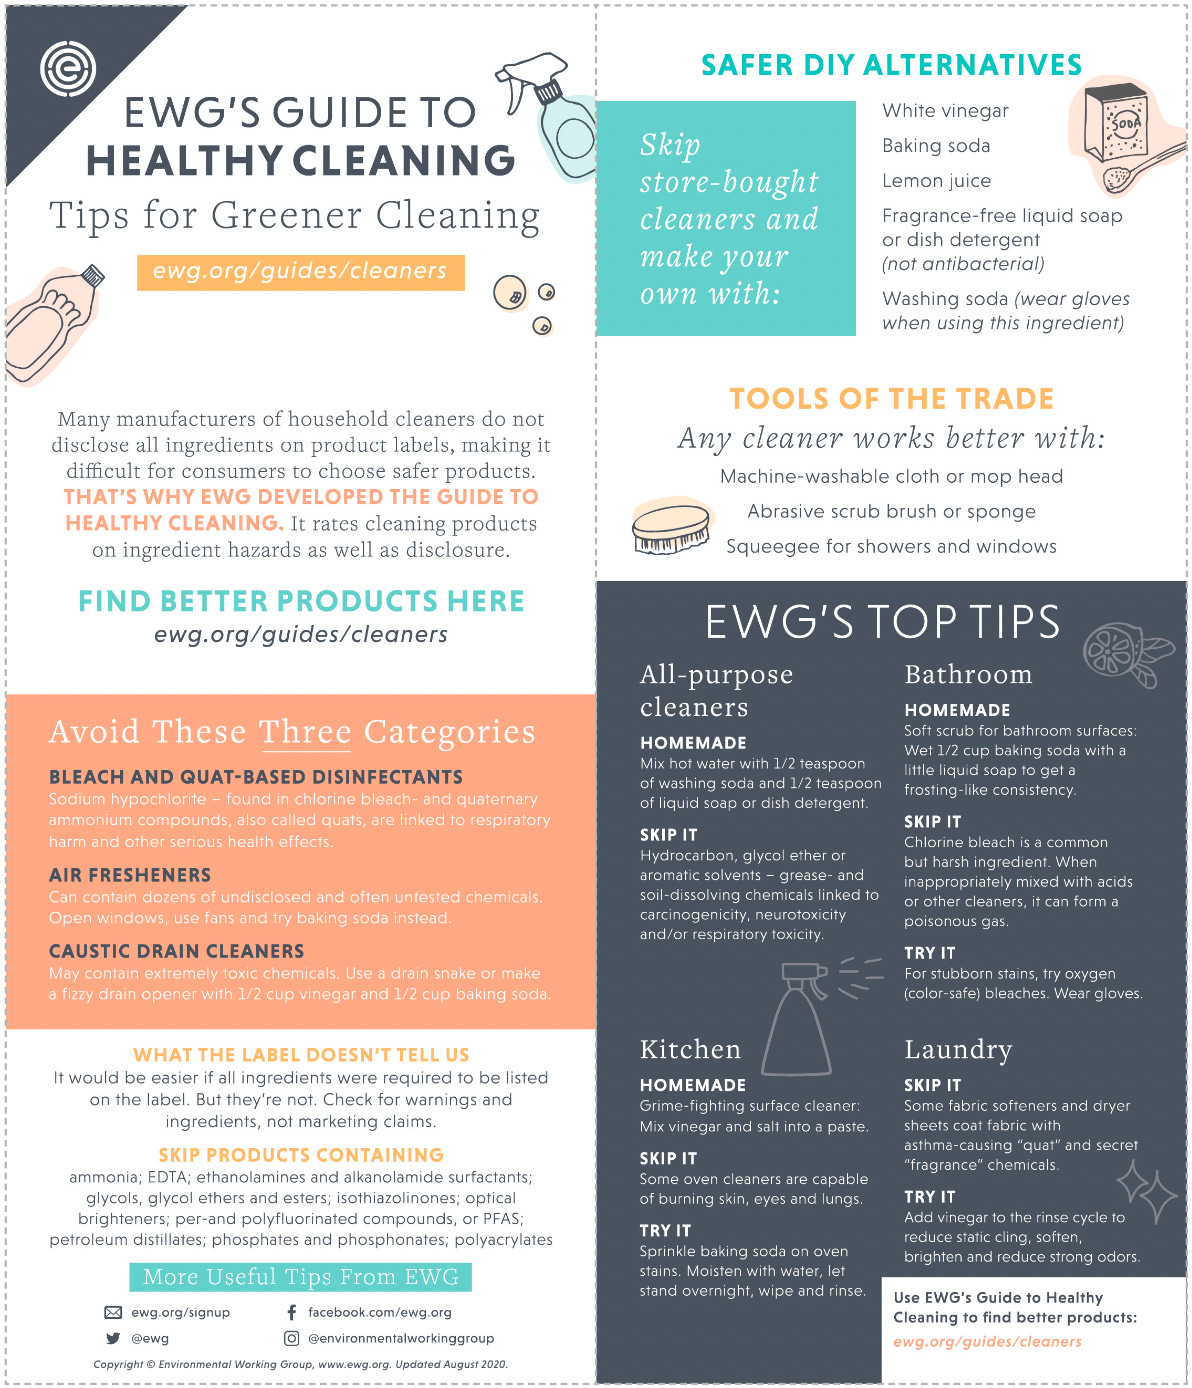 EWG's Guide to Healthy Cleaning